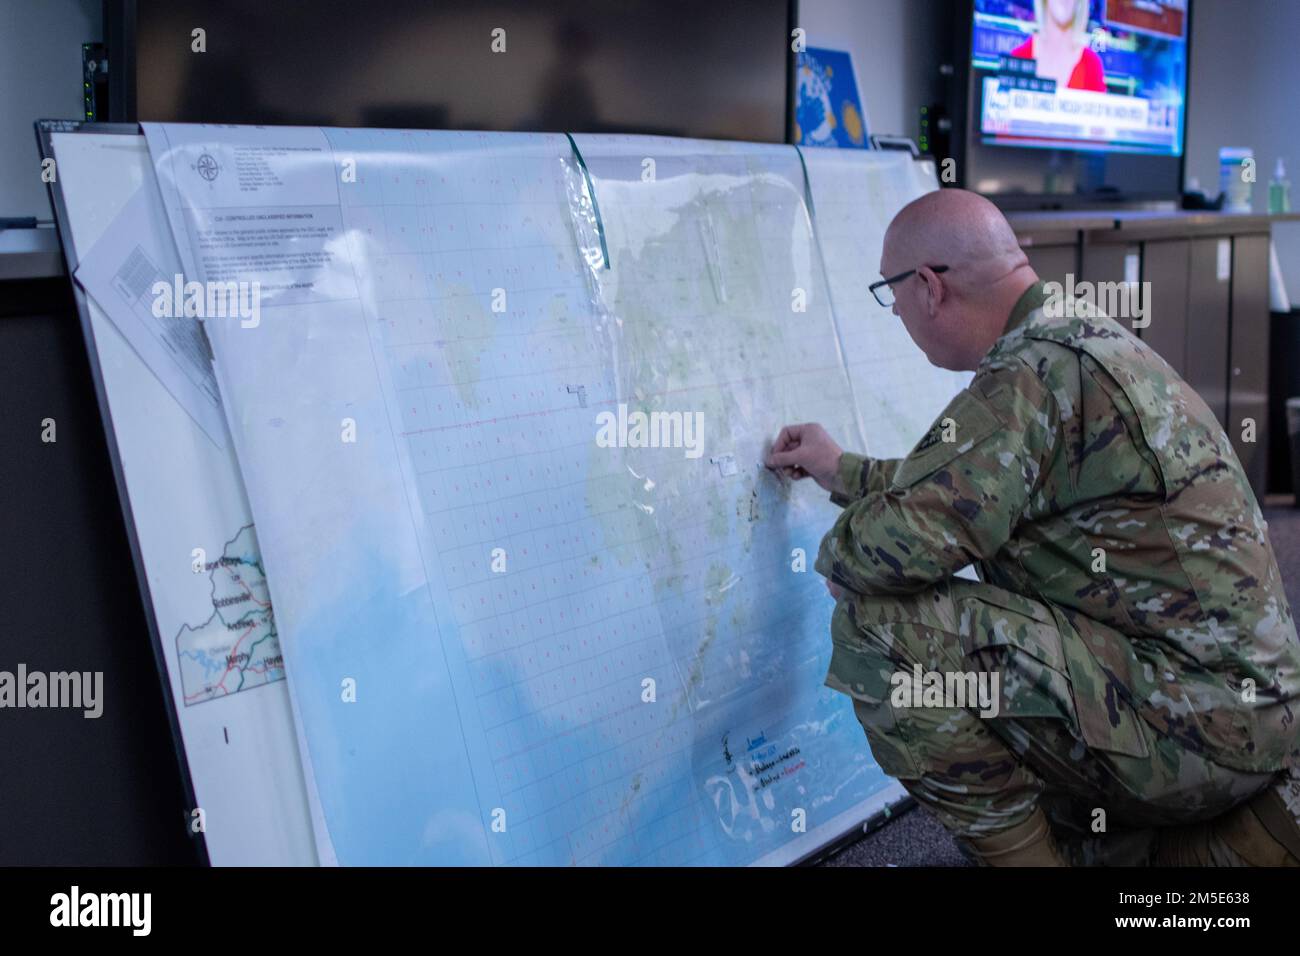 Sgt. 1st Class Niles Serls, with Headquarters and Headquarters Company, 60th Troop Command, North Carolina National Guard, plots points on a map during Exercise Arctic Eagle-Patriot 2022 (AEP22) at the Alaska National Guard Joint Force Headquarters on Joint Base Elmendorf-Richardson March 6, 2022. Exercise AEP22 increases the National Guard’s capacity to operate in austere, extreme cold-weather environments across Alaska and the Arctic region. AEP22 enhances the ability of military and civilian interagency partners to respond to a variety of emergency and homeland security missions across Alas Stock Photo